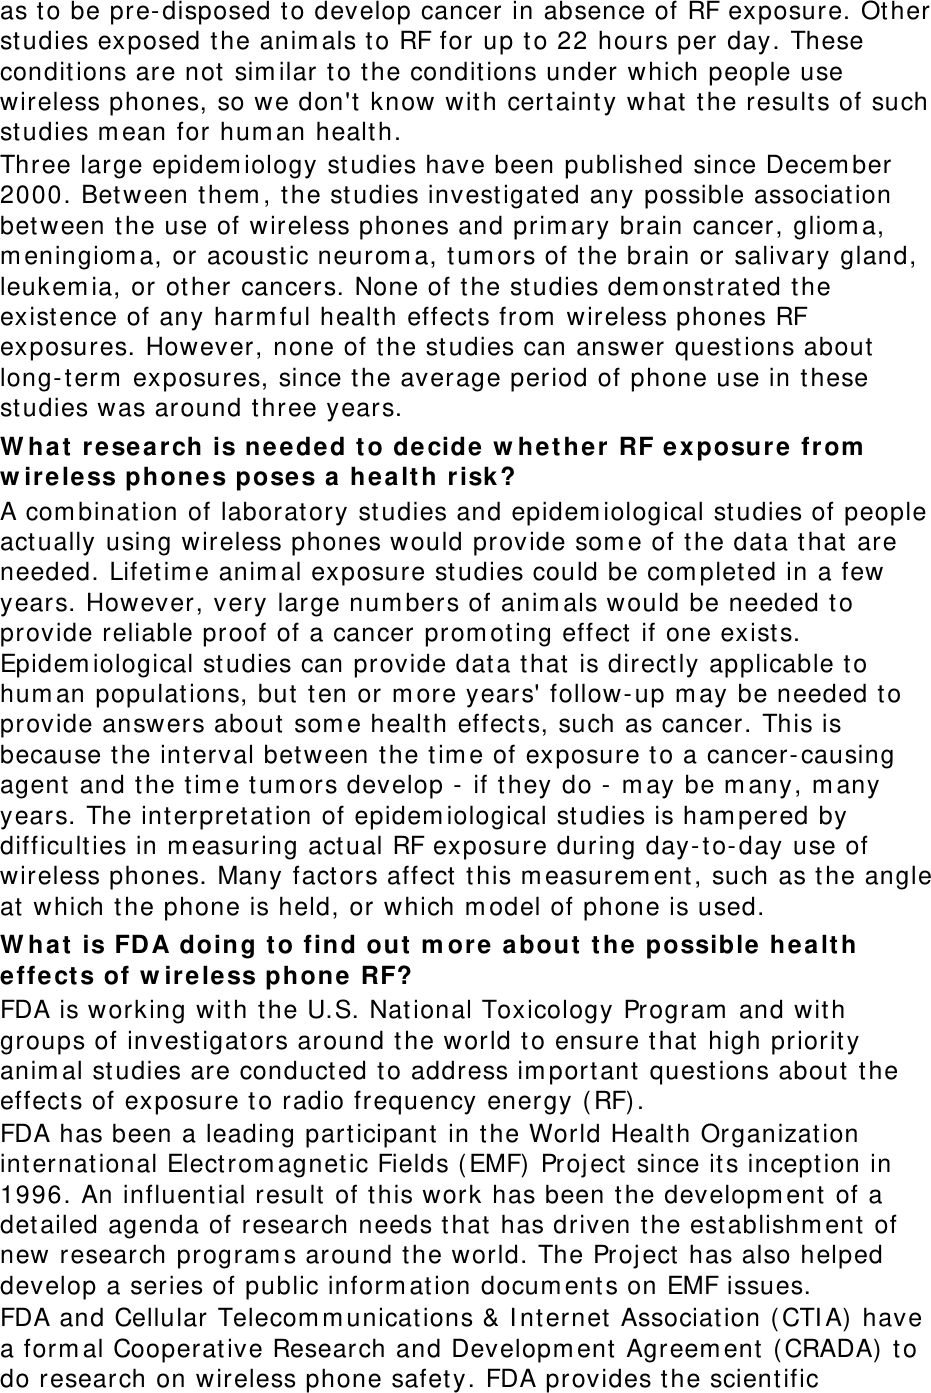 as t o be pre-disposed t o develop cancer in absence of RF exposure. Ot her studies exposed t he anim als t o RF for up to 22 hours per day. These conditions are not sim ilar t o t he conditions under which people use wireless phones, so we don&apos;t  know wit h cert ainty what the results of such studies m ean for hum an healt h. Three large epidem iology st udies have been published since Decem ber 2000. Bet ween t hem , t he studies invest igat ed any possible associat ion bet ween t he use of wireless phones and prim ary brain cancer, gliom a, m eningiom a, or acoust ic neurom a, t um ors of t he brain or salivary gland, leukem ia, or other cancers. None of t he studies dem onstrated t he existence of any harm ful health effect s from  wireless phones RF exposures. However, none of t he studies can answer quest ions about  long- term  exposures, since t he average period of phone use in these studies was around three years. W ha t re sear ch is needed t o de cide w hether RF e xposure fr om  w ir ele ss phones pose s a healt h risk ? A com bination of laboratory st udies and epidem iological st udies of people act ually using wireless phones would provide som e of t he data t hat are needed. Lifetim e anim al exposure st udies could be com pleted in a few years. However, very large num bers of anim als would be needed to provide reliable proof of a cancer prom ot ing effect  if one exists. Epidem iological studies can provide data t hat is direct ly applicable t o hum an populat ions, but ten or m ore years&apos; follow- up m ay be needed t o provide answers about som e health effect s, such as cancer. This is because t he interval bet ween t he t im e of exposure to a cancer- causing agent  and the tim e tum ors develop - if t hey do -  m ay be m any, m any years. The interpretation of epidem iological studies is ham pered by difficulties in m easuring act ual RF exposure during day- t o-day use of wireless phones. Many fact ors affect  t his m easurem ent , such as t he angle at  which t he phone is held, or which m odel of phone is used. W ha t is FD A doing t o find out  m ore about t he possible  he alt h effects of w ire less phone RF? FDA is working wit h the U.S. National Toxicology Program  and with groups of invest igat ors around the world t o ensure t hat high priority anim al studies are conduct ed t o address im port ant quest ions about  t he effect s of exposure to radio frequency energy ( RF). FDA has been a leading participant  in the World Health Organization internat ional Elect rom agnet ic Fields ( EMF)  Project since its inception in 1996. An influent ial result of t his work has been t he developm ent  of a det ailed agenda of research needs that  has driven t he establishm ent  of new research program s around t he world. The Project has also helped develop a series of public inform ation docum ents on EMF issues. FDA and Cellular Telecom m unicat ions &amp; I nt ernet  Associat ion ( CTI A) have a form al Cooperative Research and Developm ent  Agreem ent  ( CRADA)  t o do research on wireless phone safety. FDA provides t he scient ific 